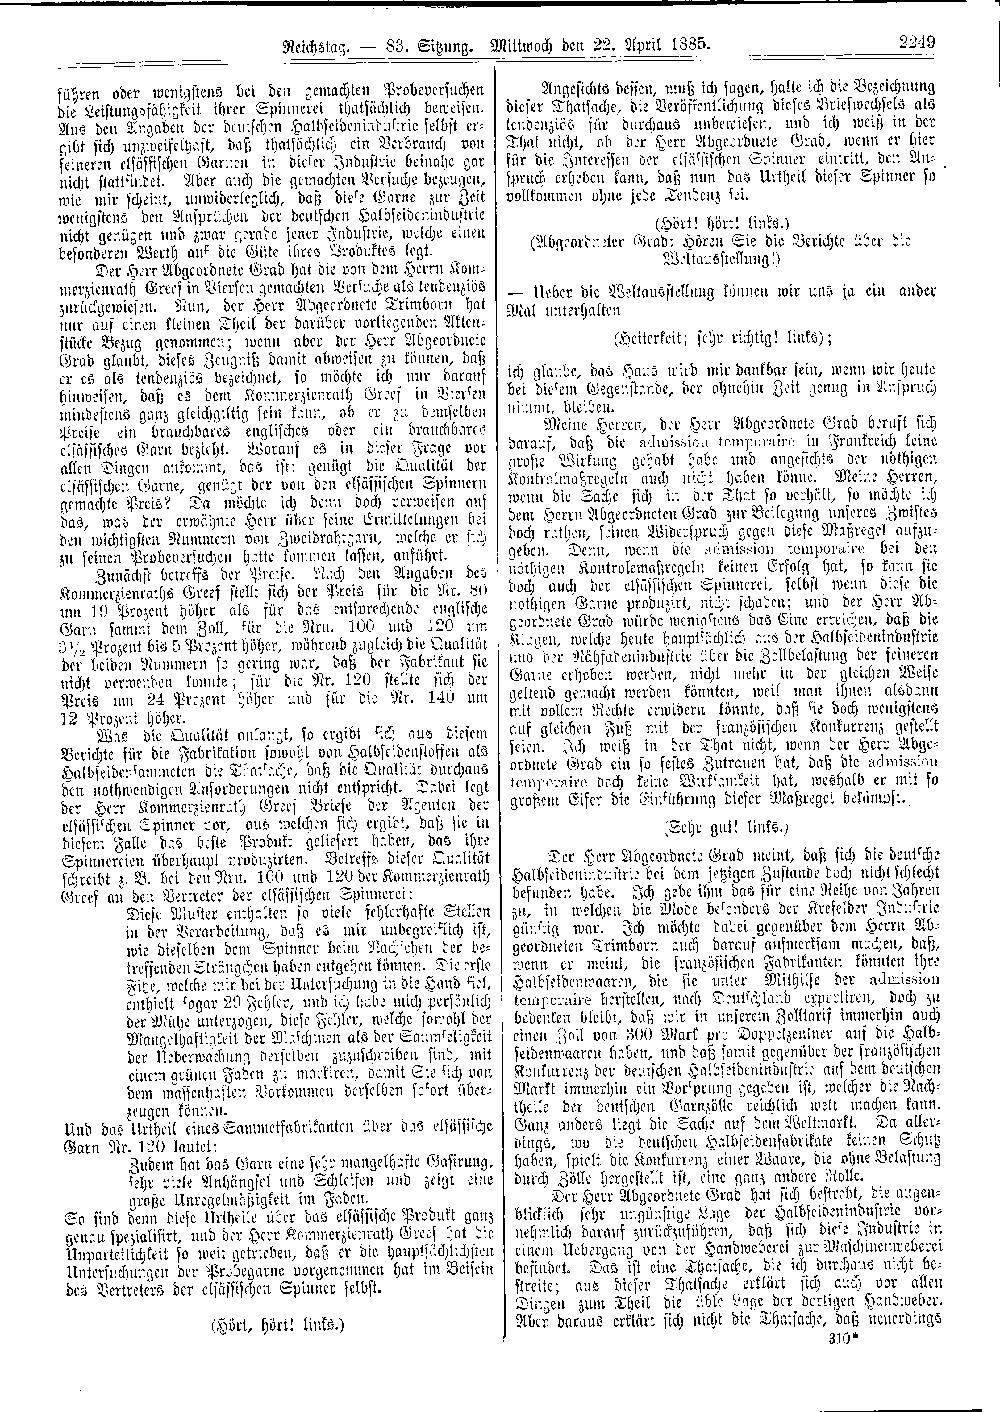 Scan of page 2249